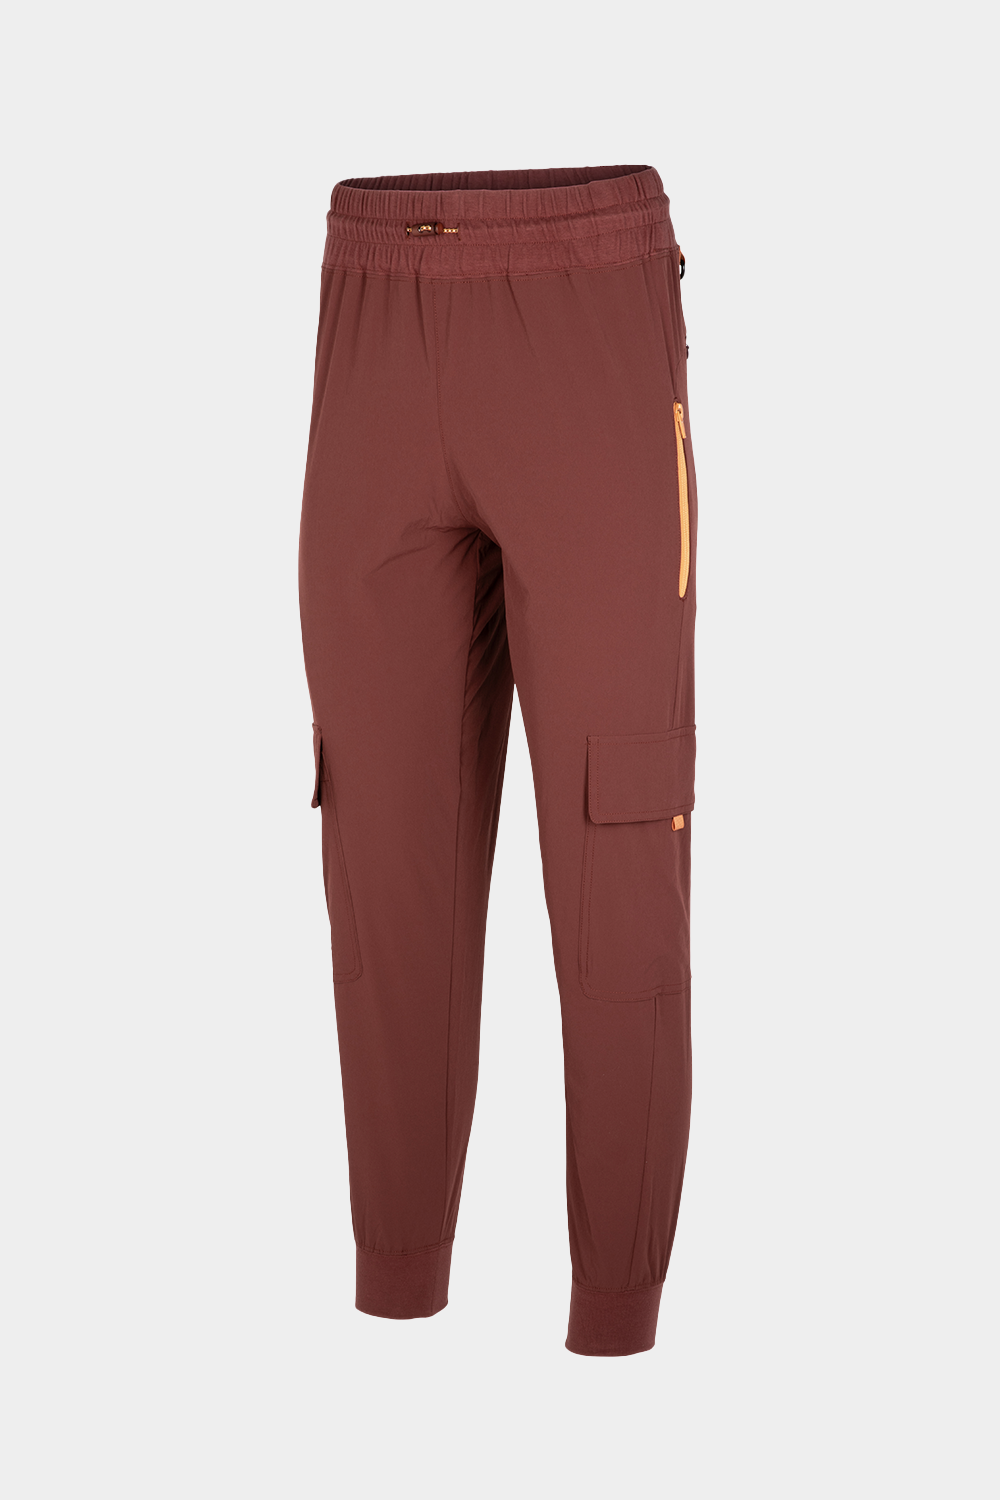 front view of burgundy red lightweight women's climbing pants with cargo pockets and elastic waistband on female mannequin